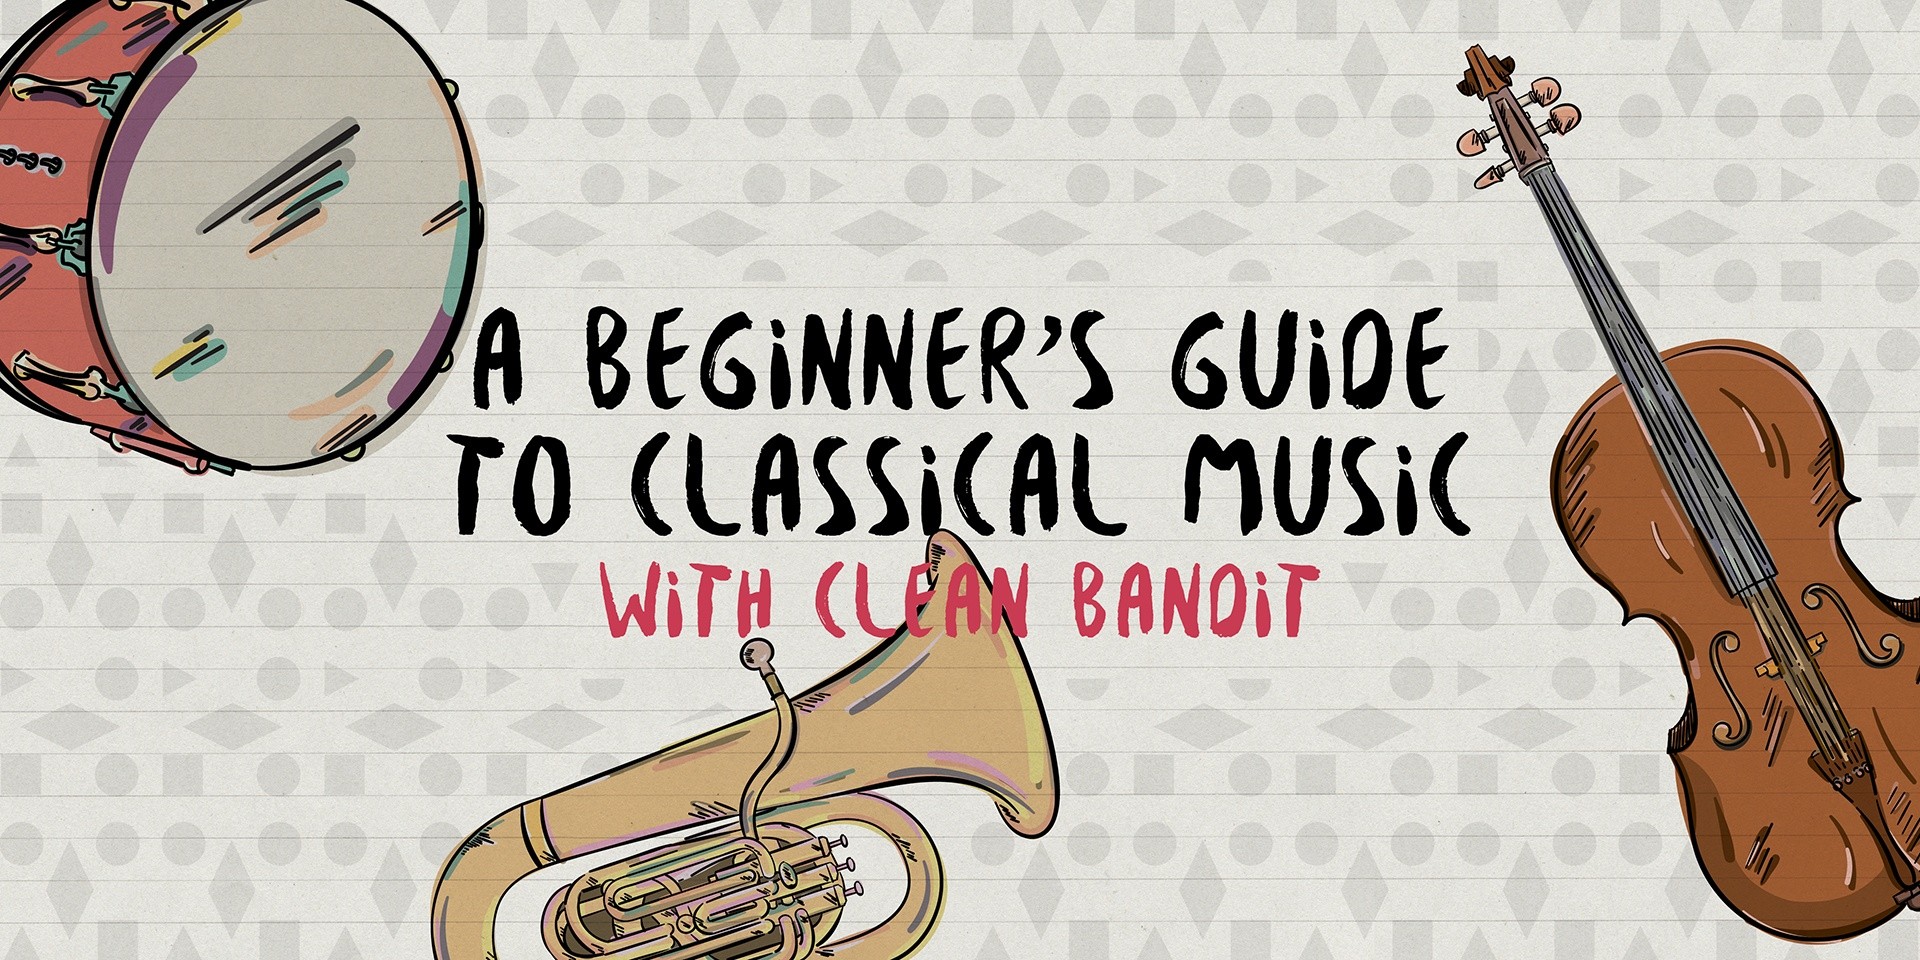 A Beginner's Guide to Classical Music with Clean Bandit